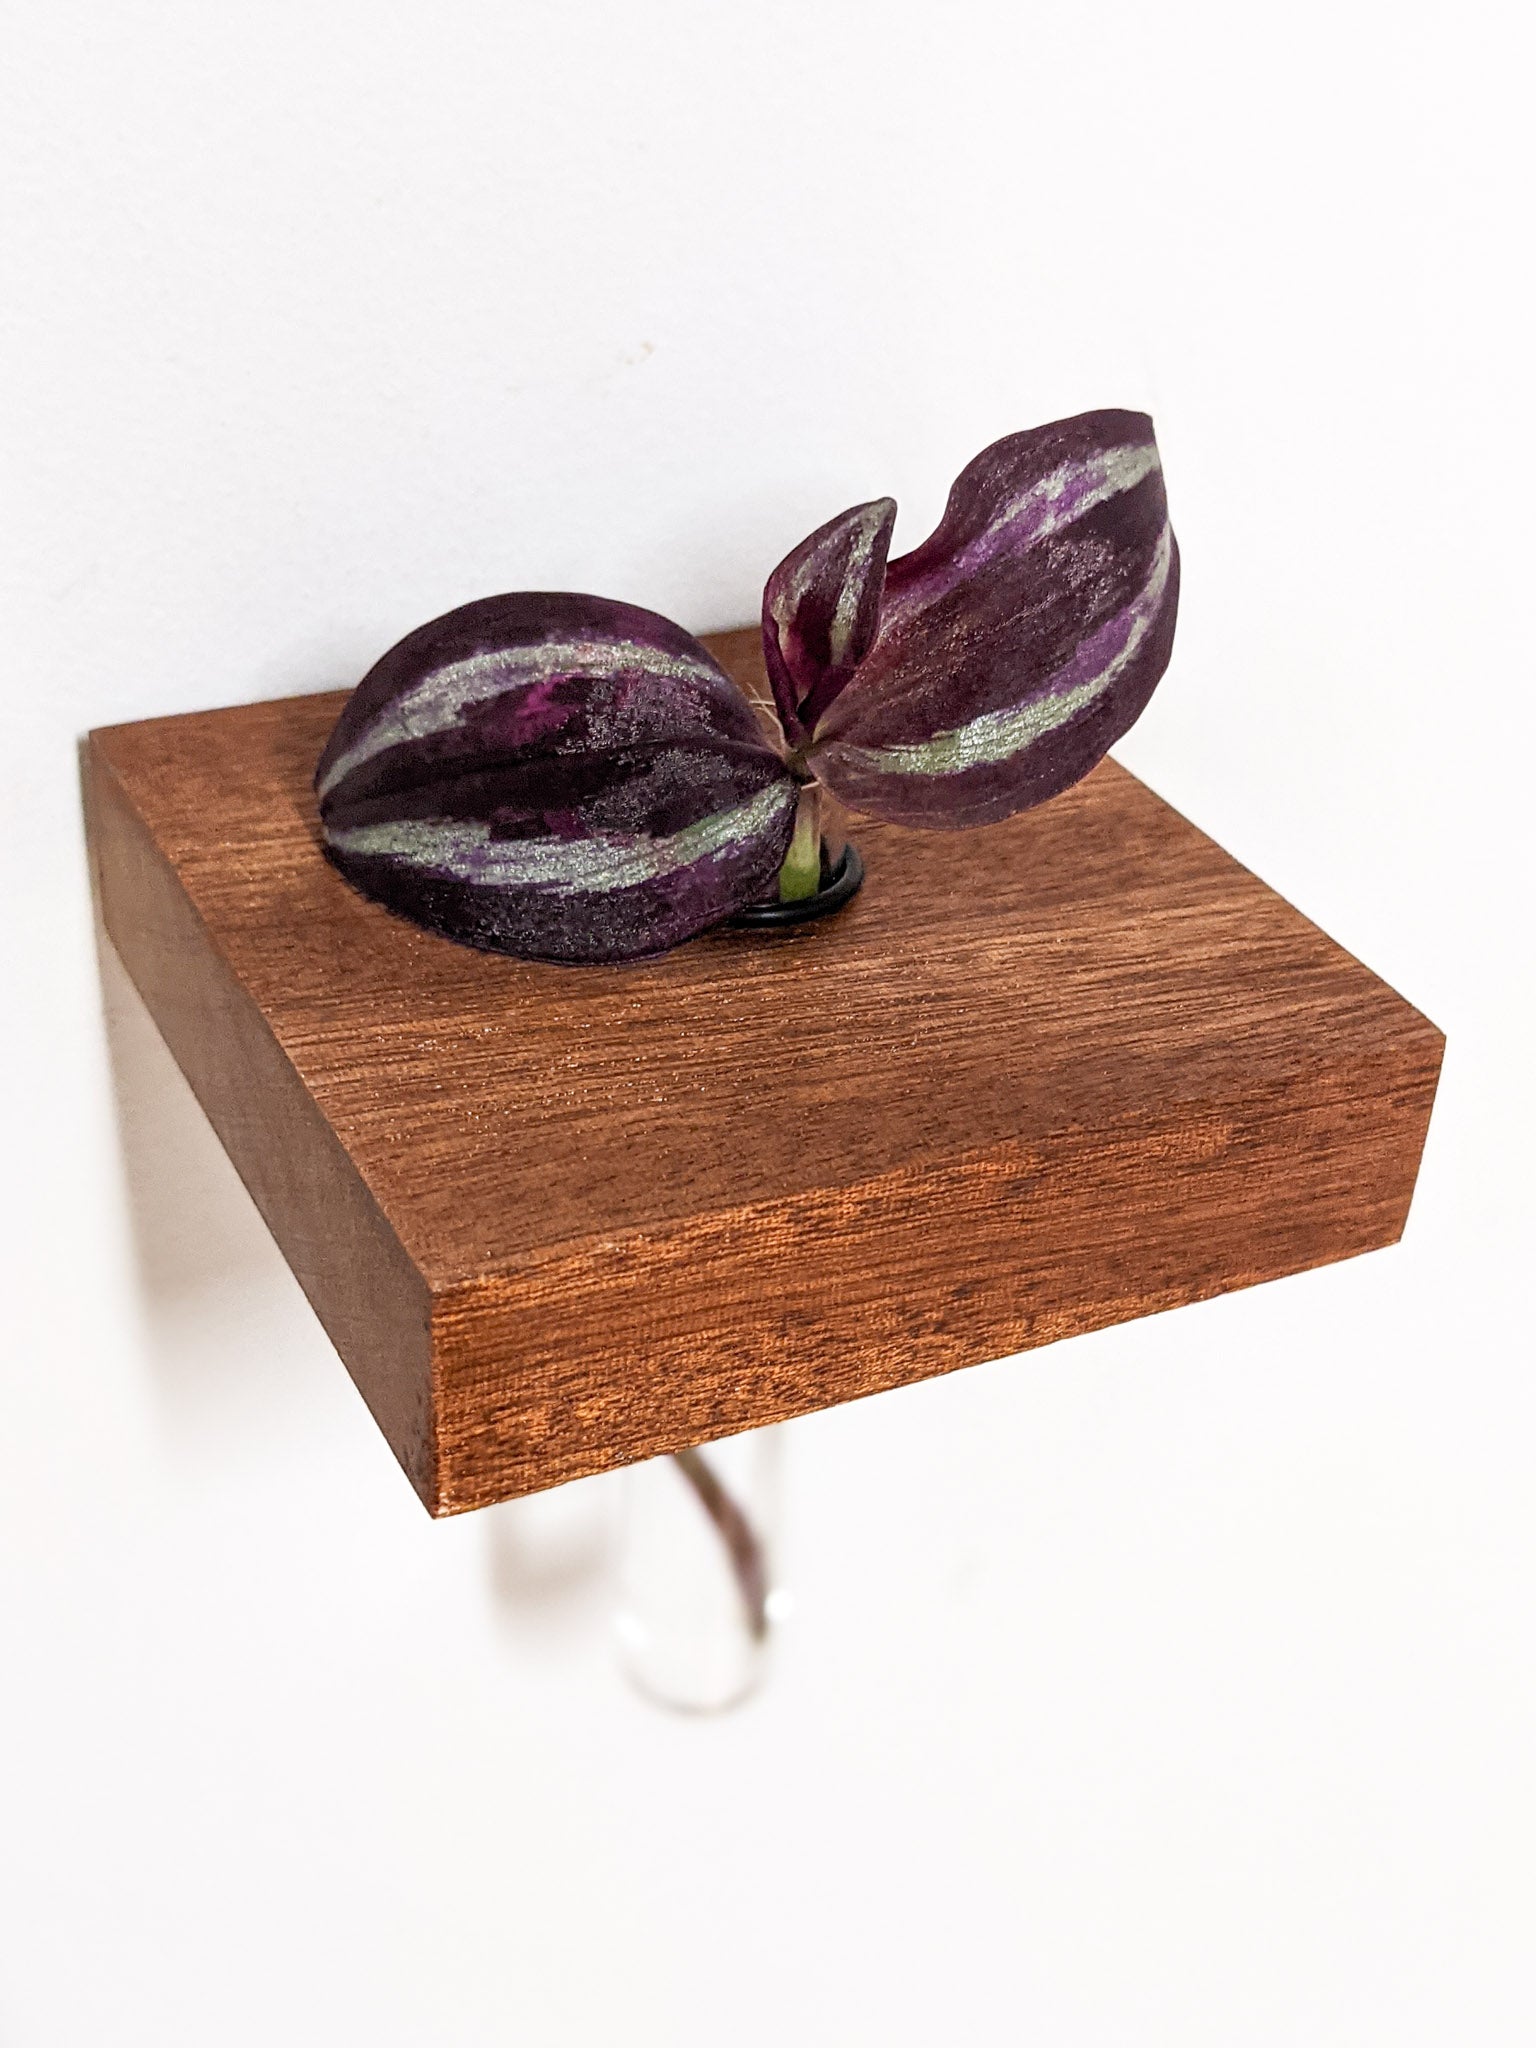 A single small mahogany propagation shelf is wall-mounted. A test tube securely fits within the provided hole and a vibrant wandering jew cutting sits within the test tube. The plant has two beautiful purple and green variegated leaves. 